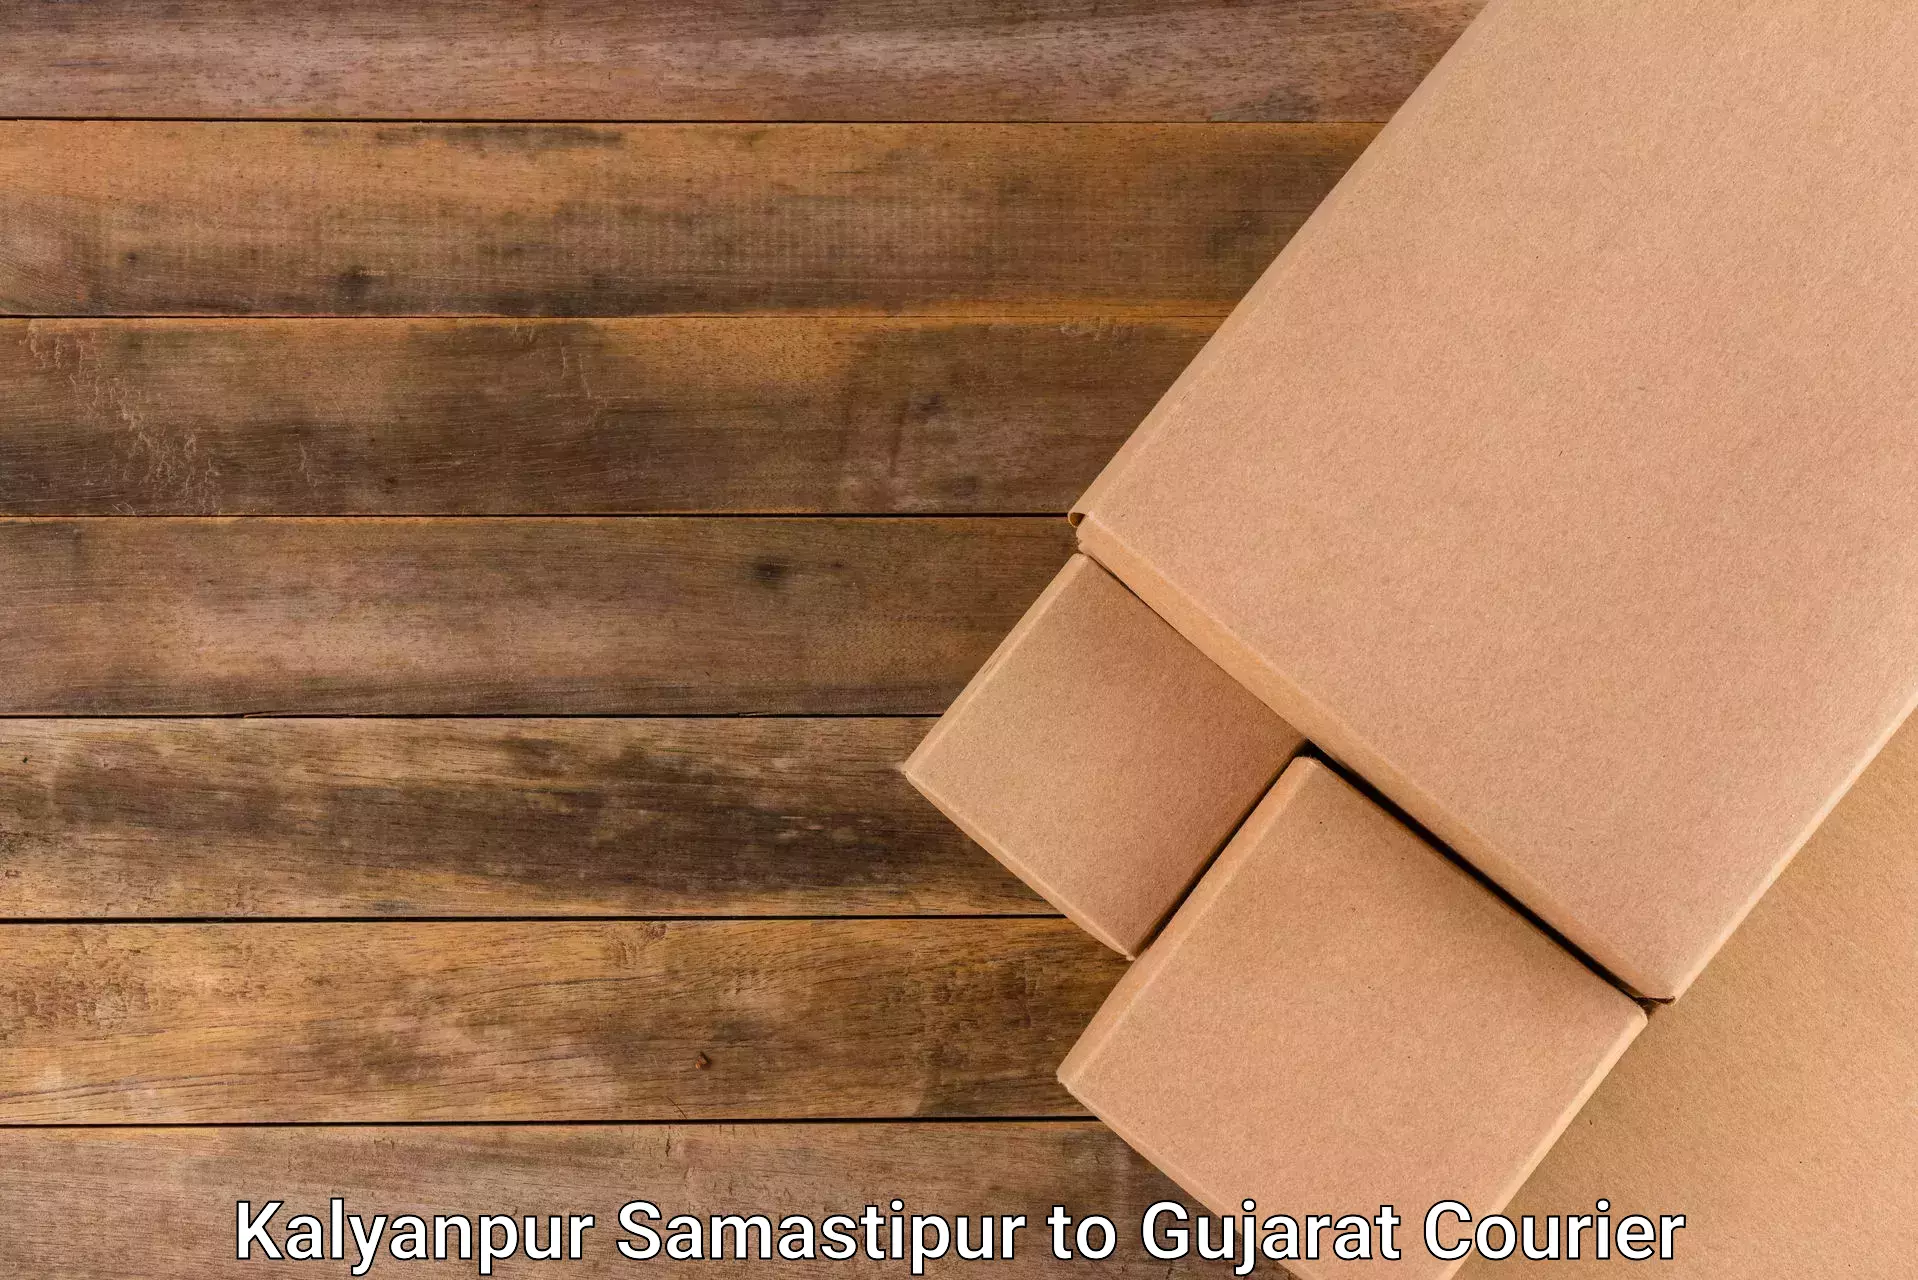 Round-the-clock parcel delivery Kalyanpur Samastipur to Kadana